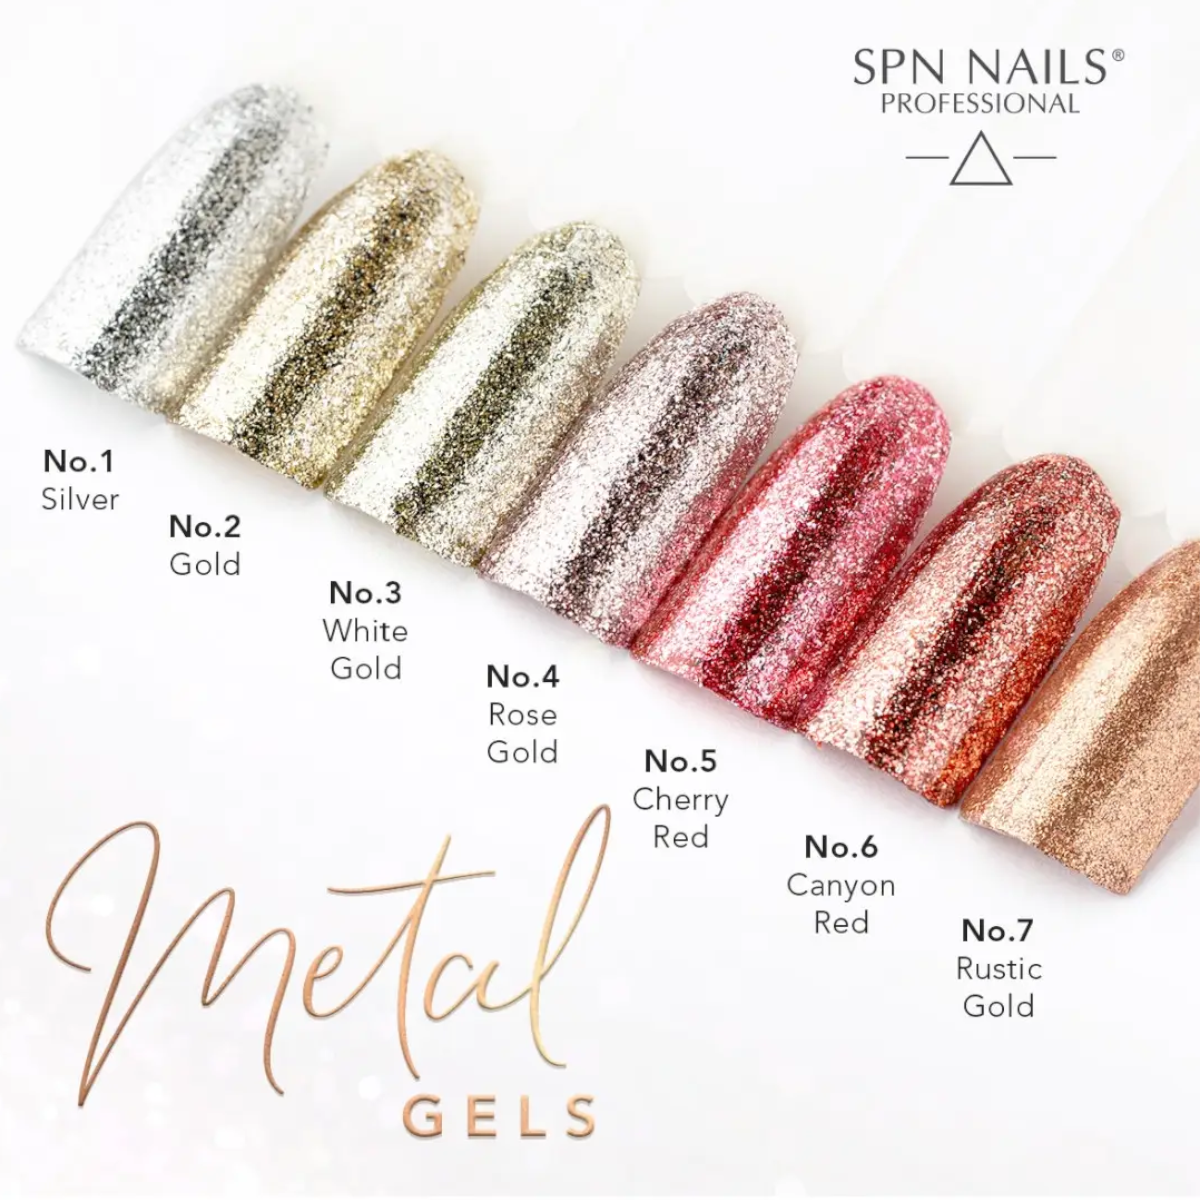 SPN Nails Metal Gel No.5 Cherry Red Glitter Collection